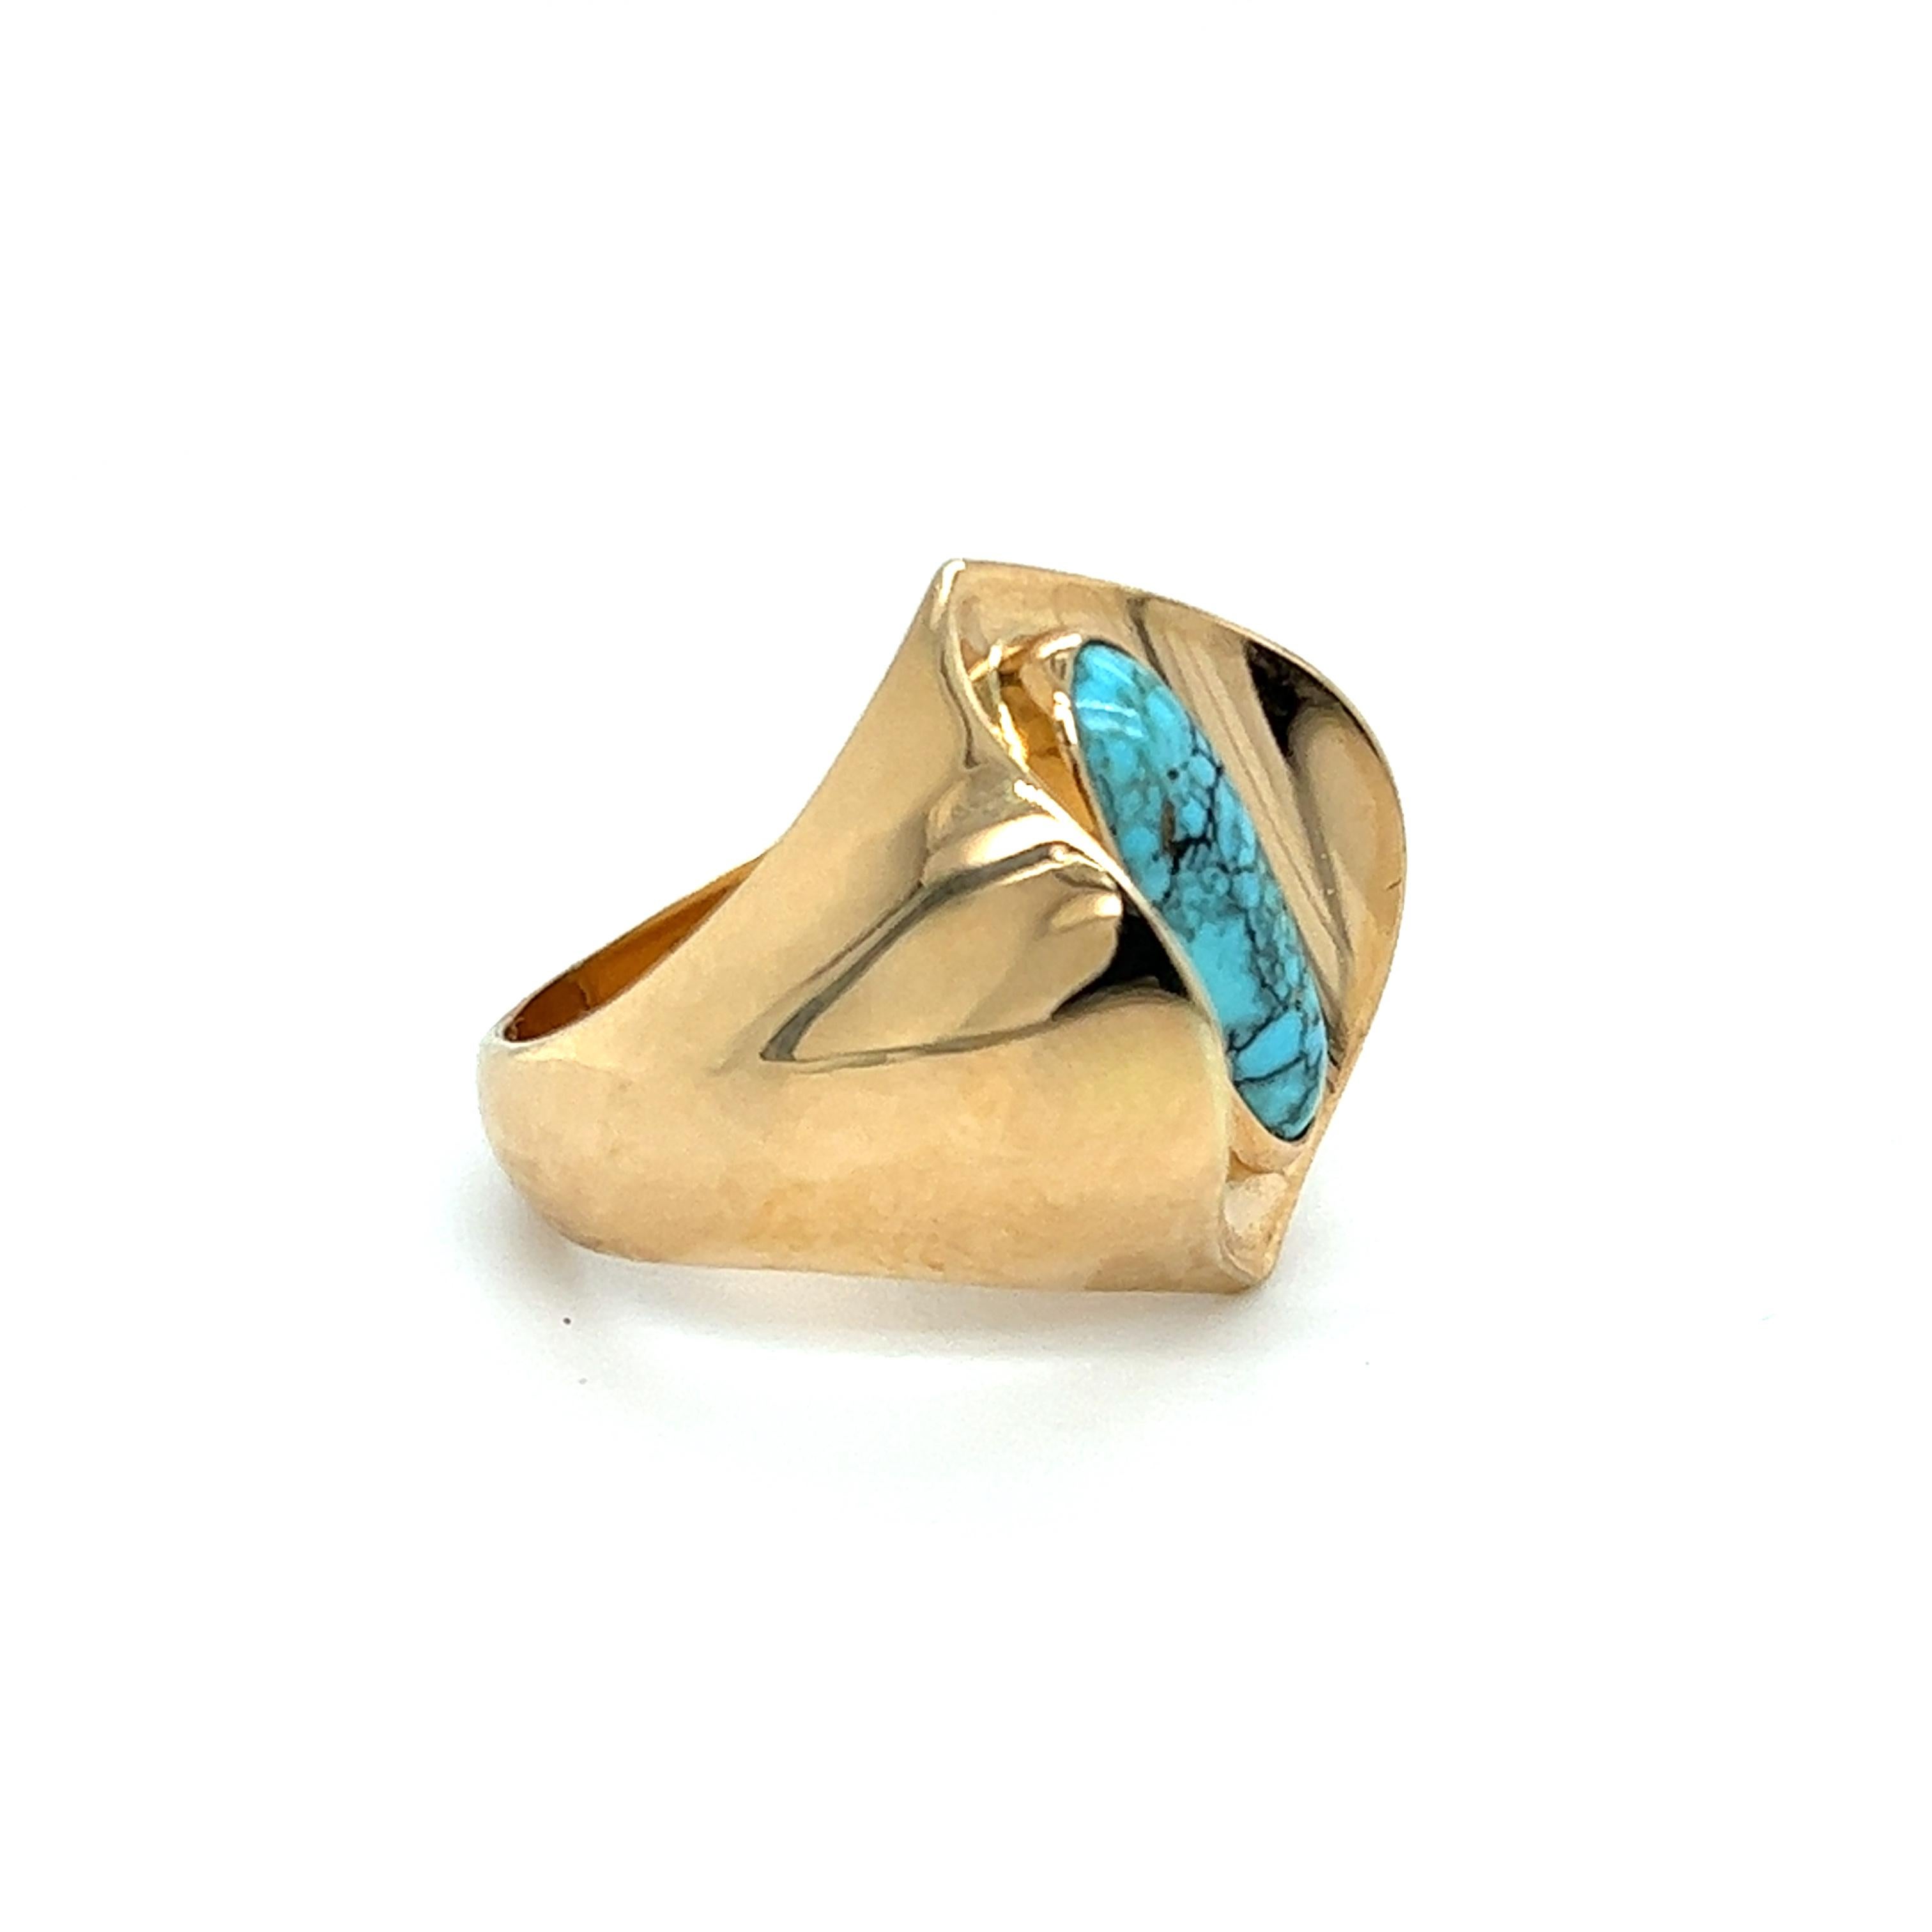 The  Spiderweb Turquoise Ring in 18 karat yellow gold by Danish vintage designer Poul Warmind features a 13.9×5.3 marquise-shaped cabochon spiderweb turquoise in a bezel setting. The band measures 16mm wide at the top and tapers to 4.8mm at the